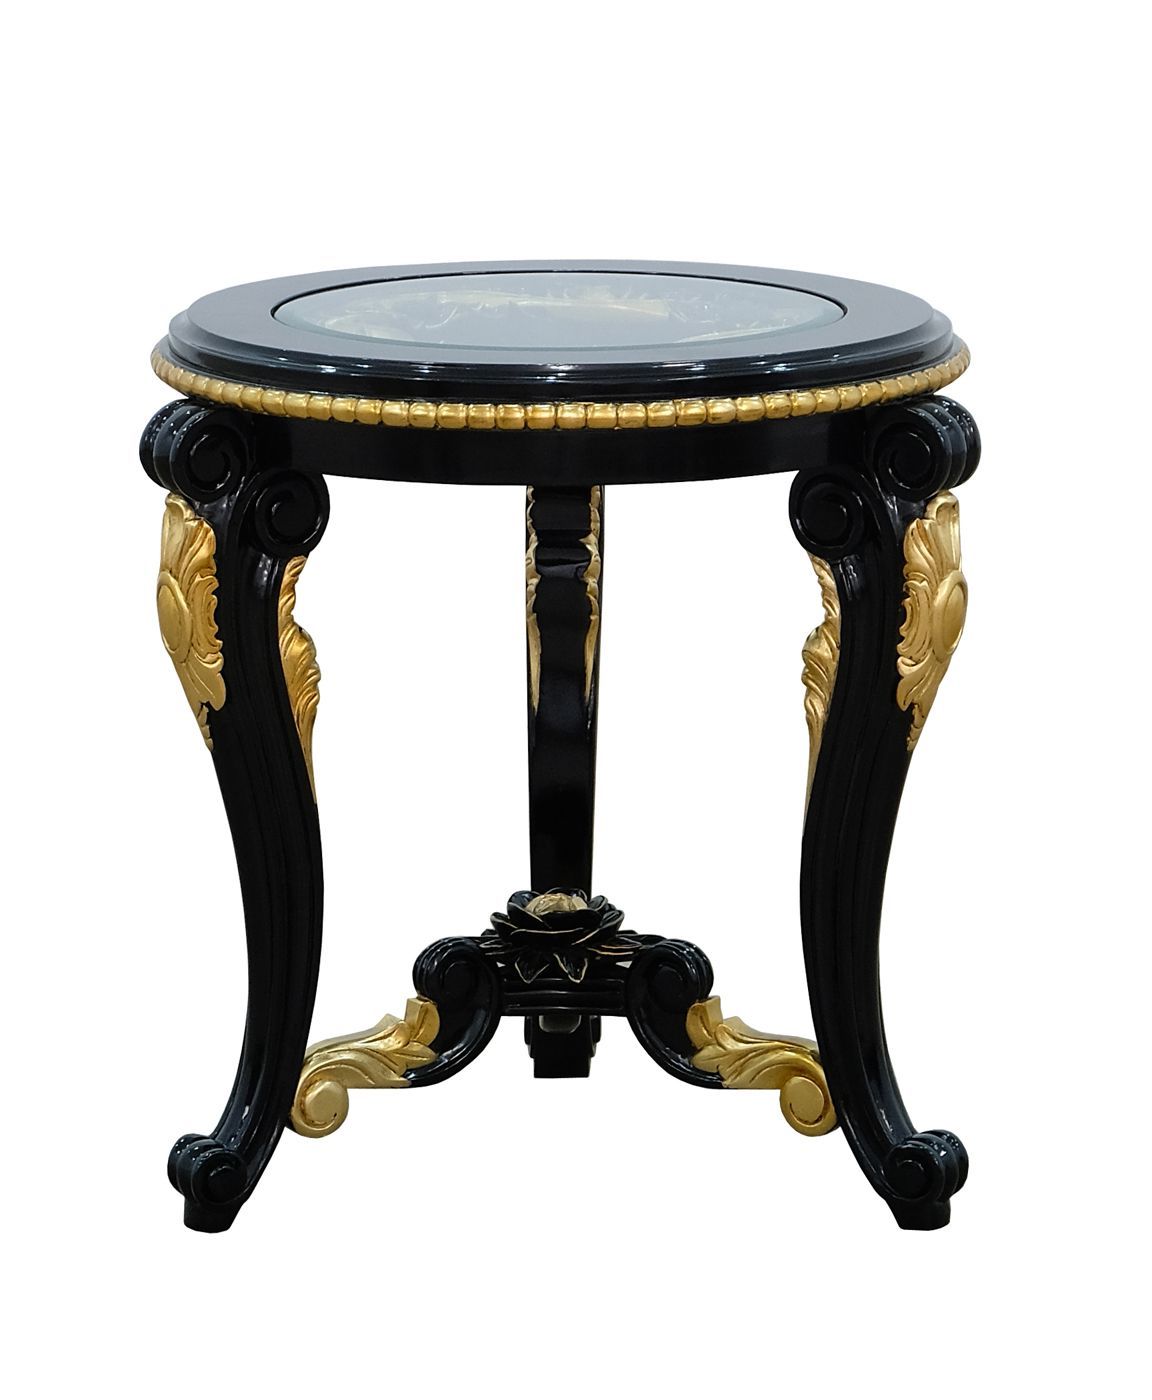 Fashionable Blue And Gold Round Side Stools Regarding Traditional Round Glass Top Chair Side Table Solid Mahogany Black & Gold (View 5 of 10)